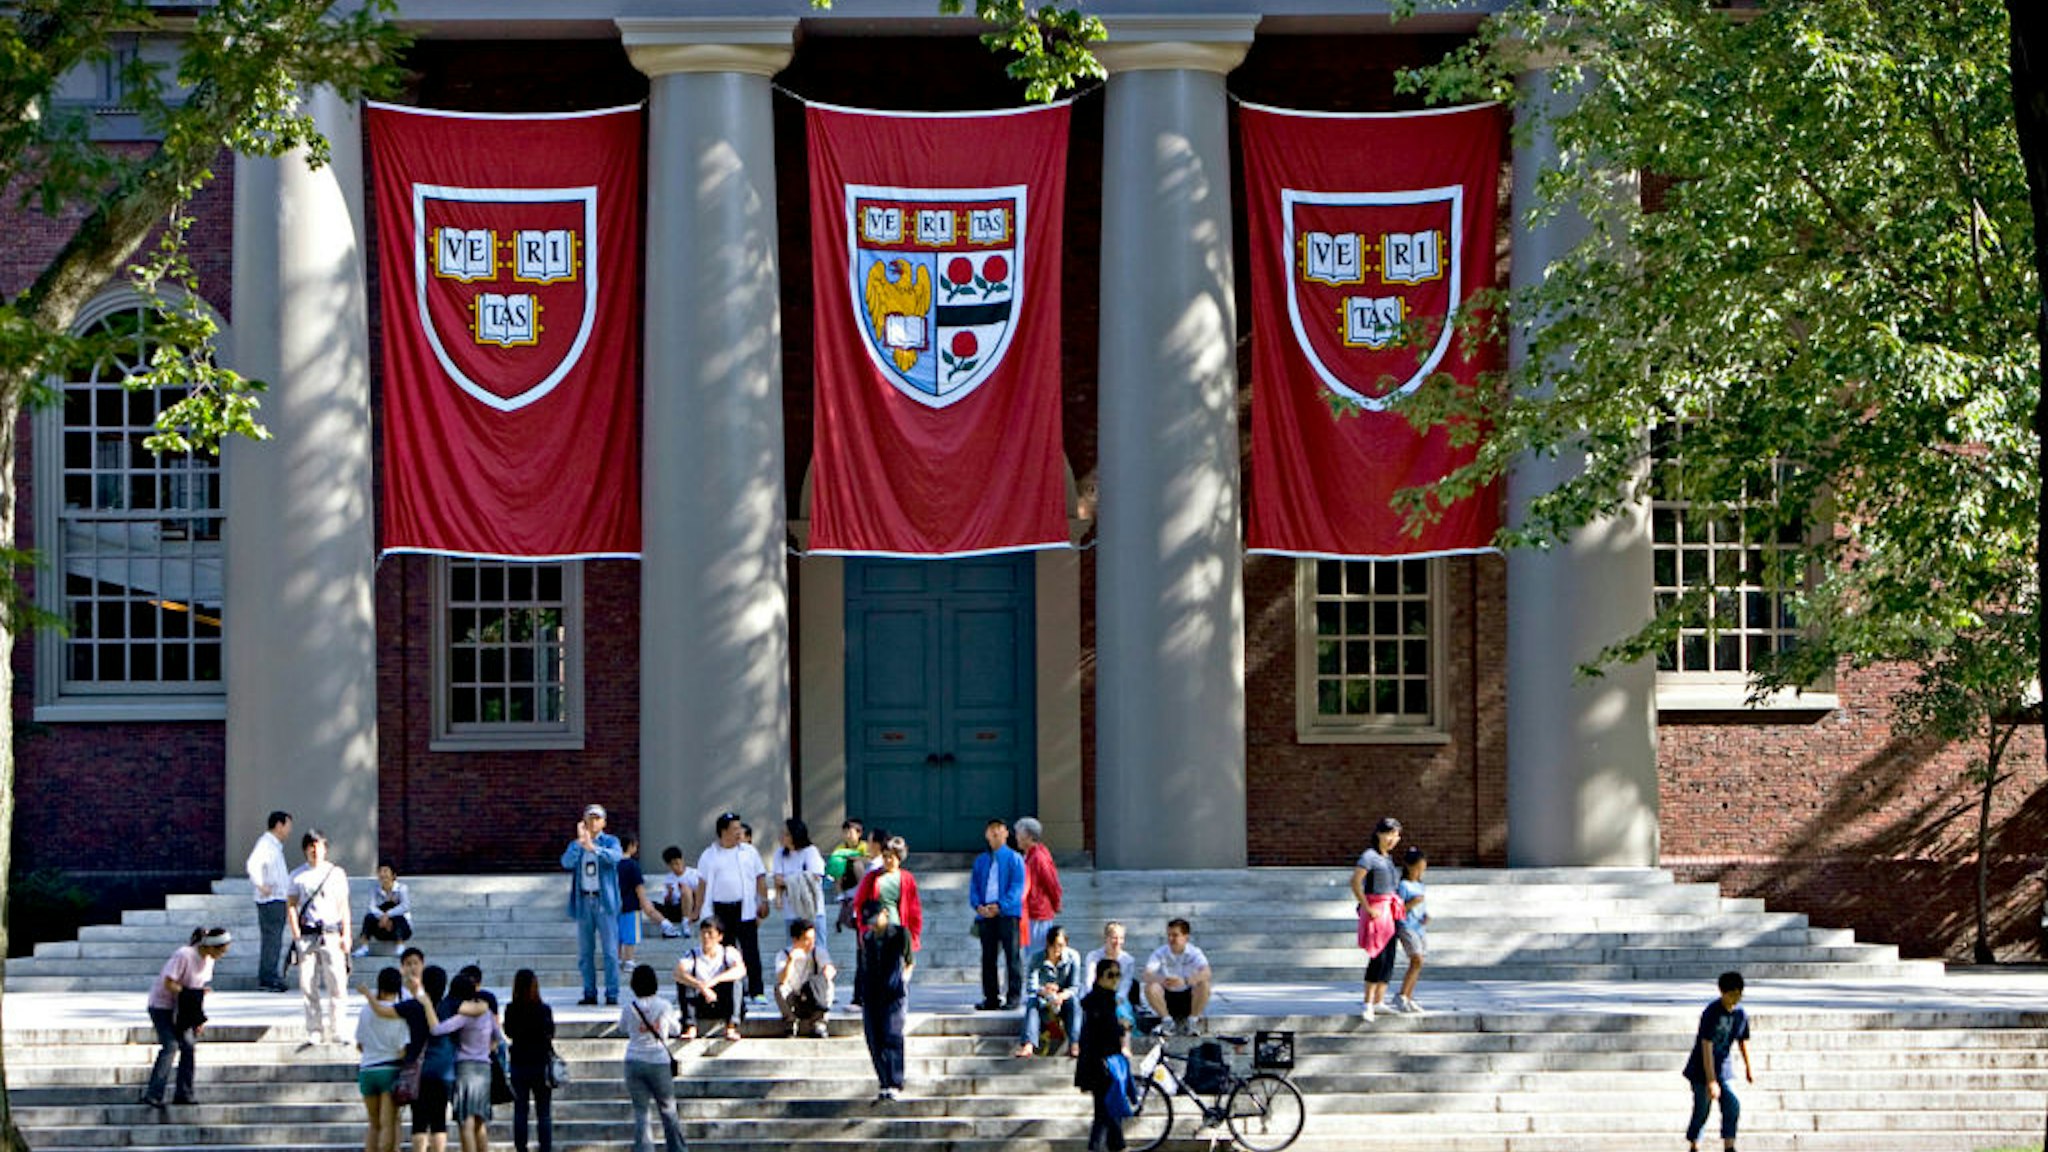 UNITED STATES - SEPTEMBER 03: Harvard banners hang outside Memorial Church on the Harvard University campus in Cambridge, Massachusetts, U.S., on Friday, Sept. 4, 2009. Community activists in Allston, a section of Boston across the Charles River from Harvard's main campus in Cambridge, say university delays have left a (Photo by Michael Fein/Bloomberg via Getty Images)